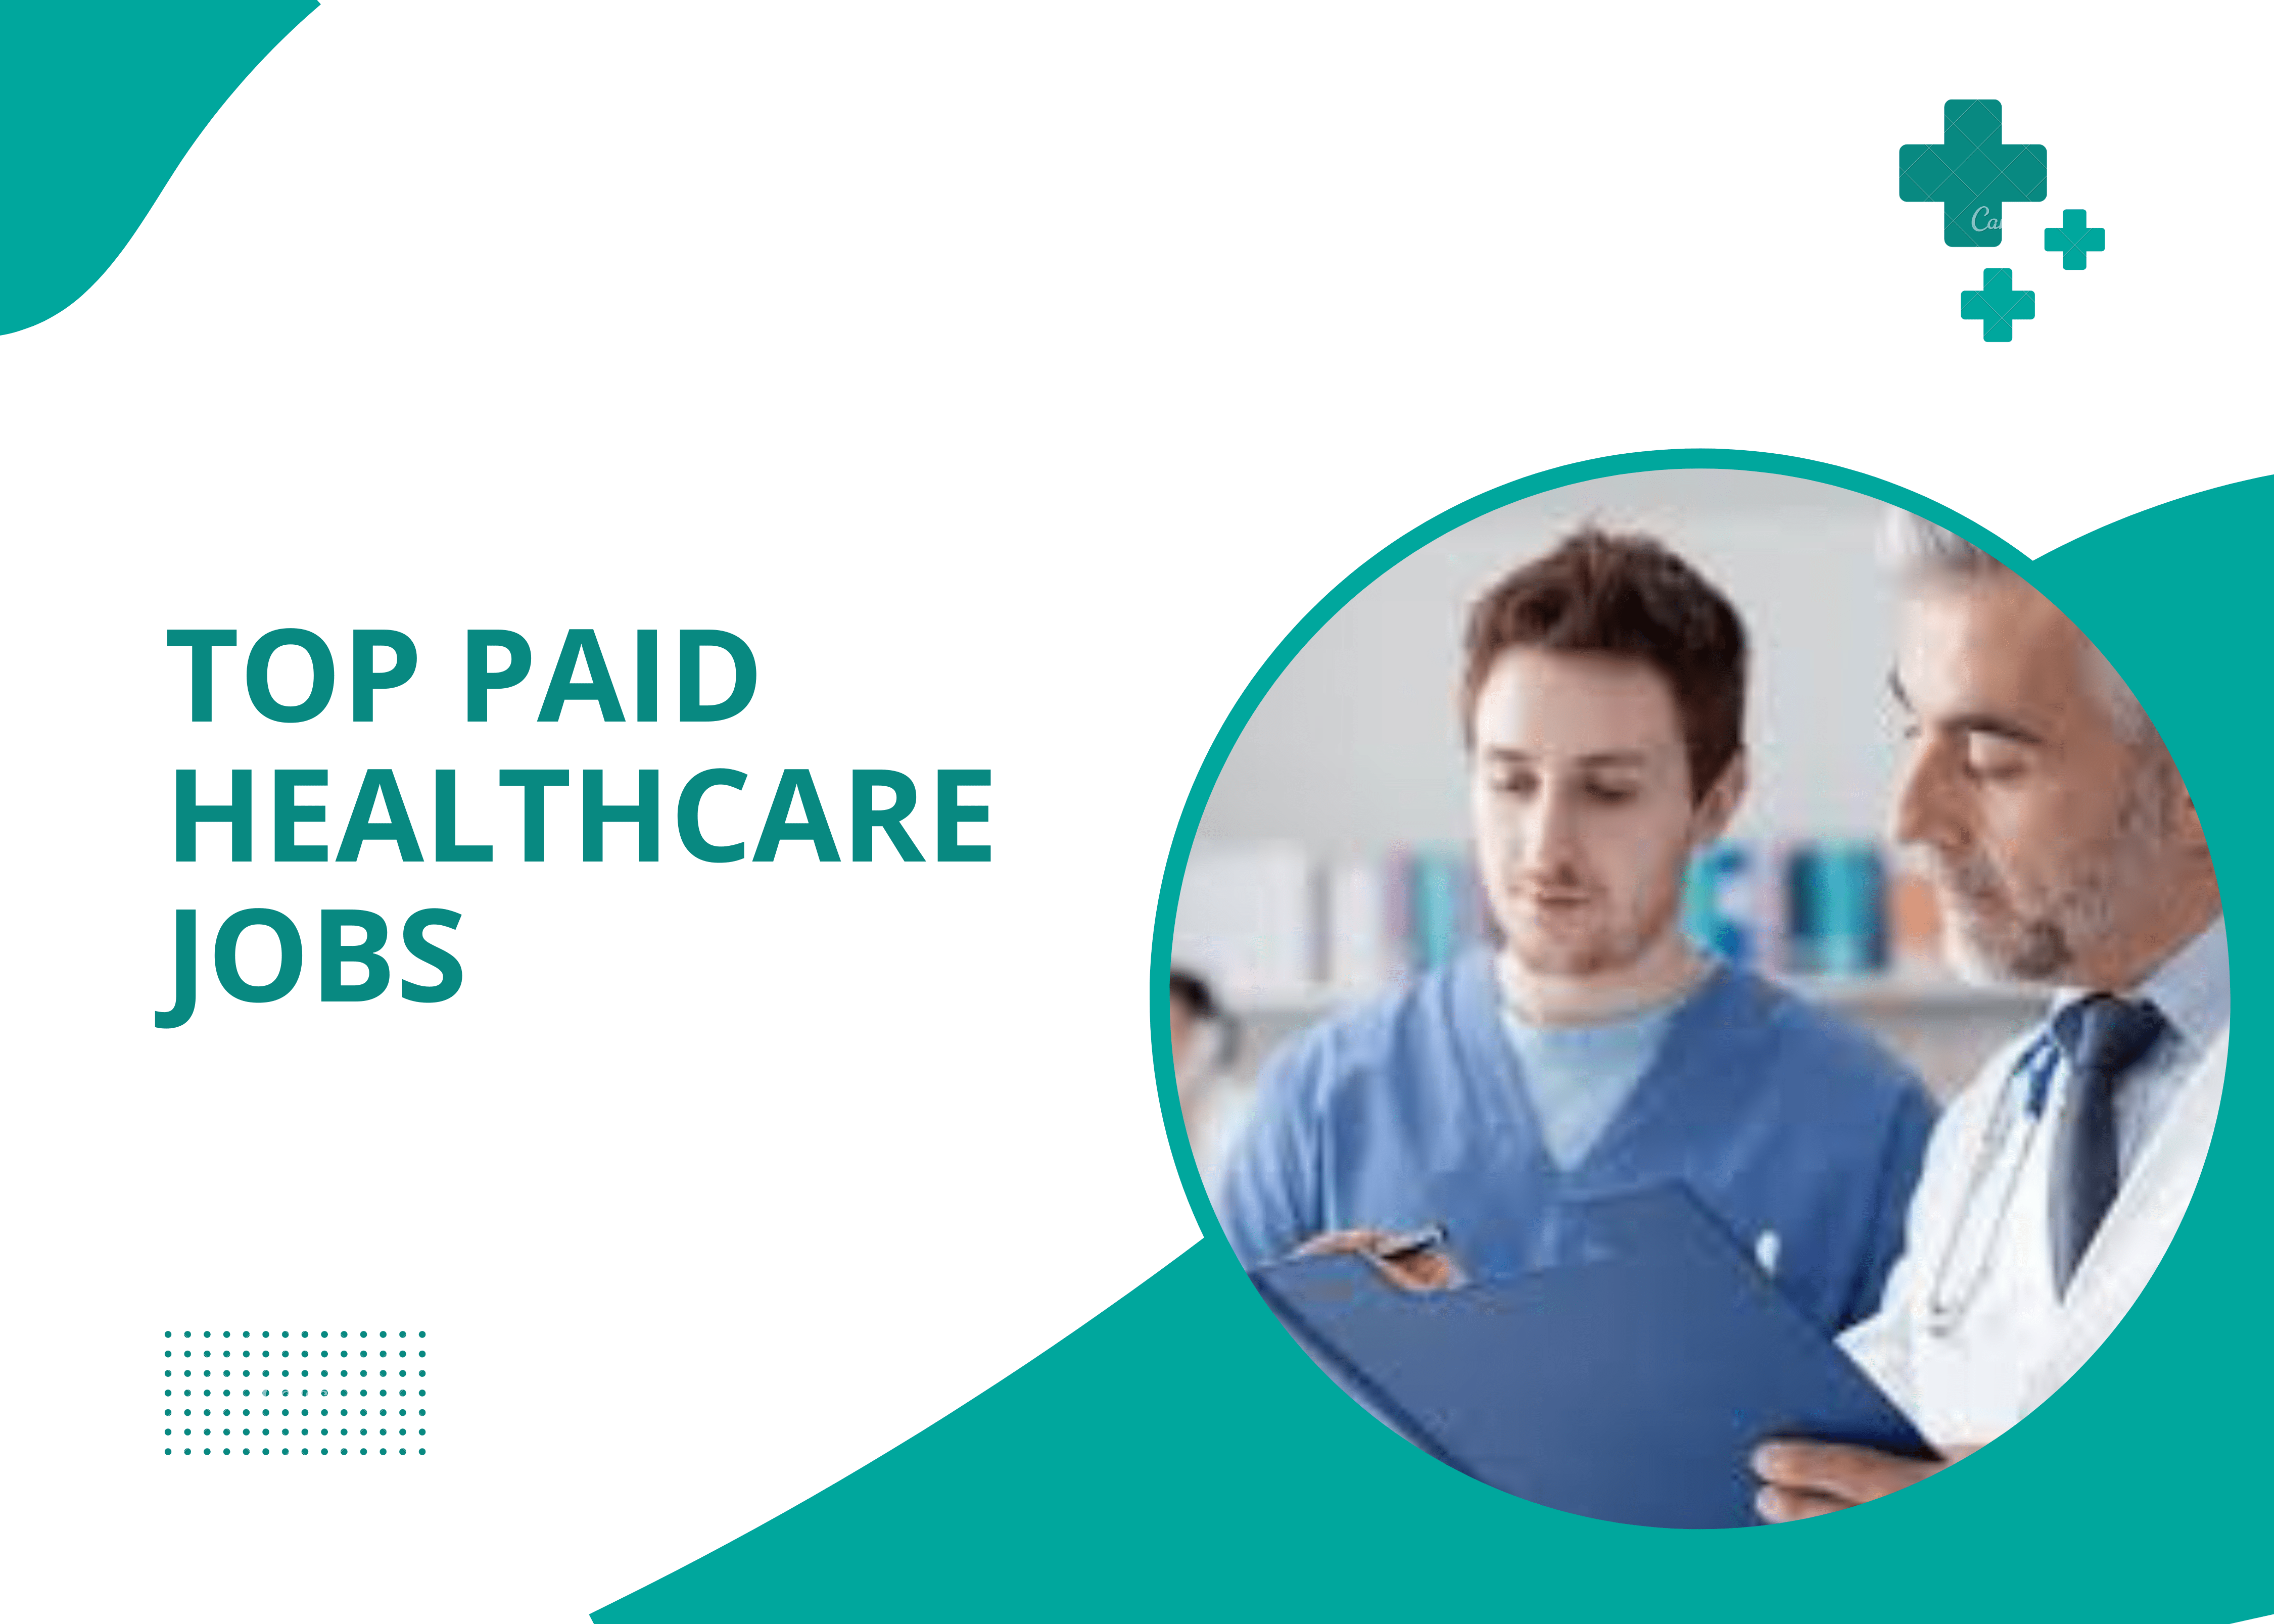 "Image featuring various healthcare-related symbols, including a stethoscope, medical cross, pills, and a heartbeat line, representing the top paid healthcare jobs and lucrative career paths in the medical field."